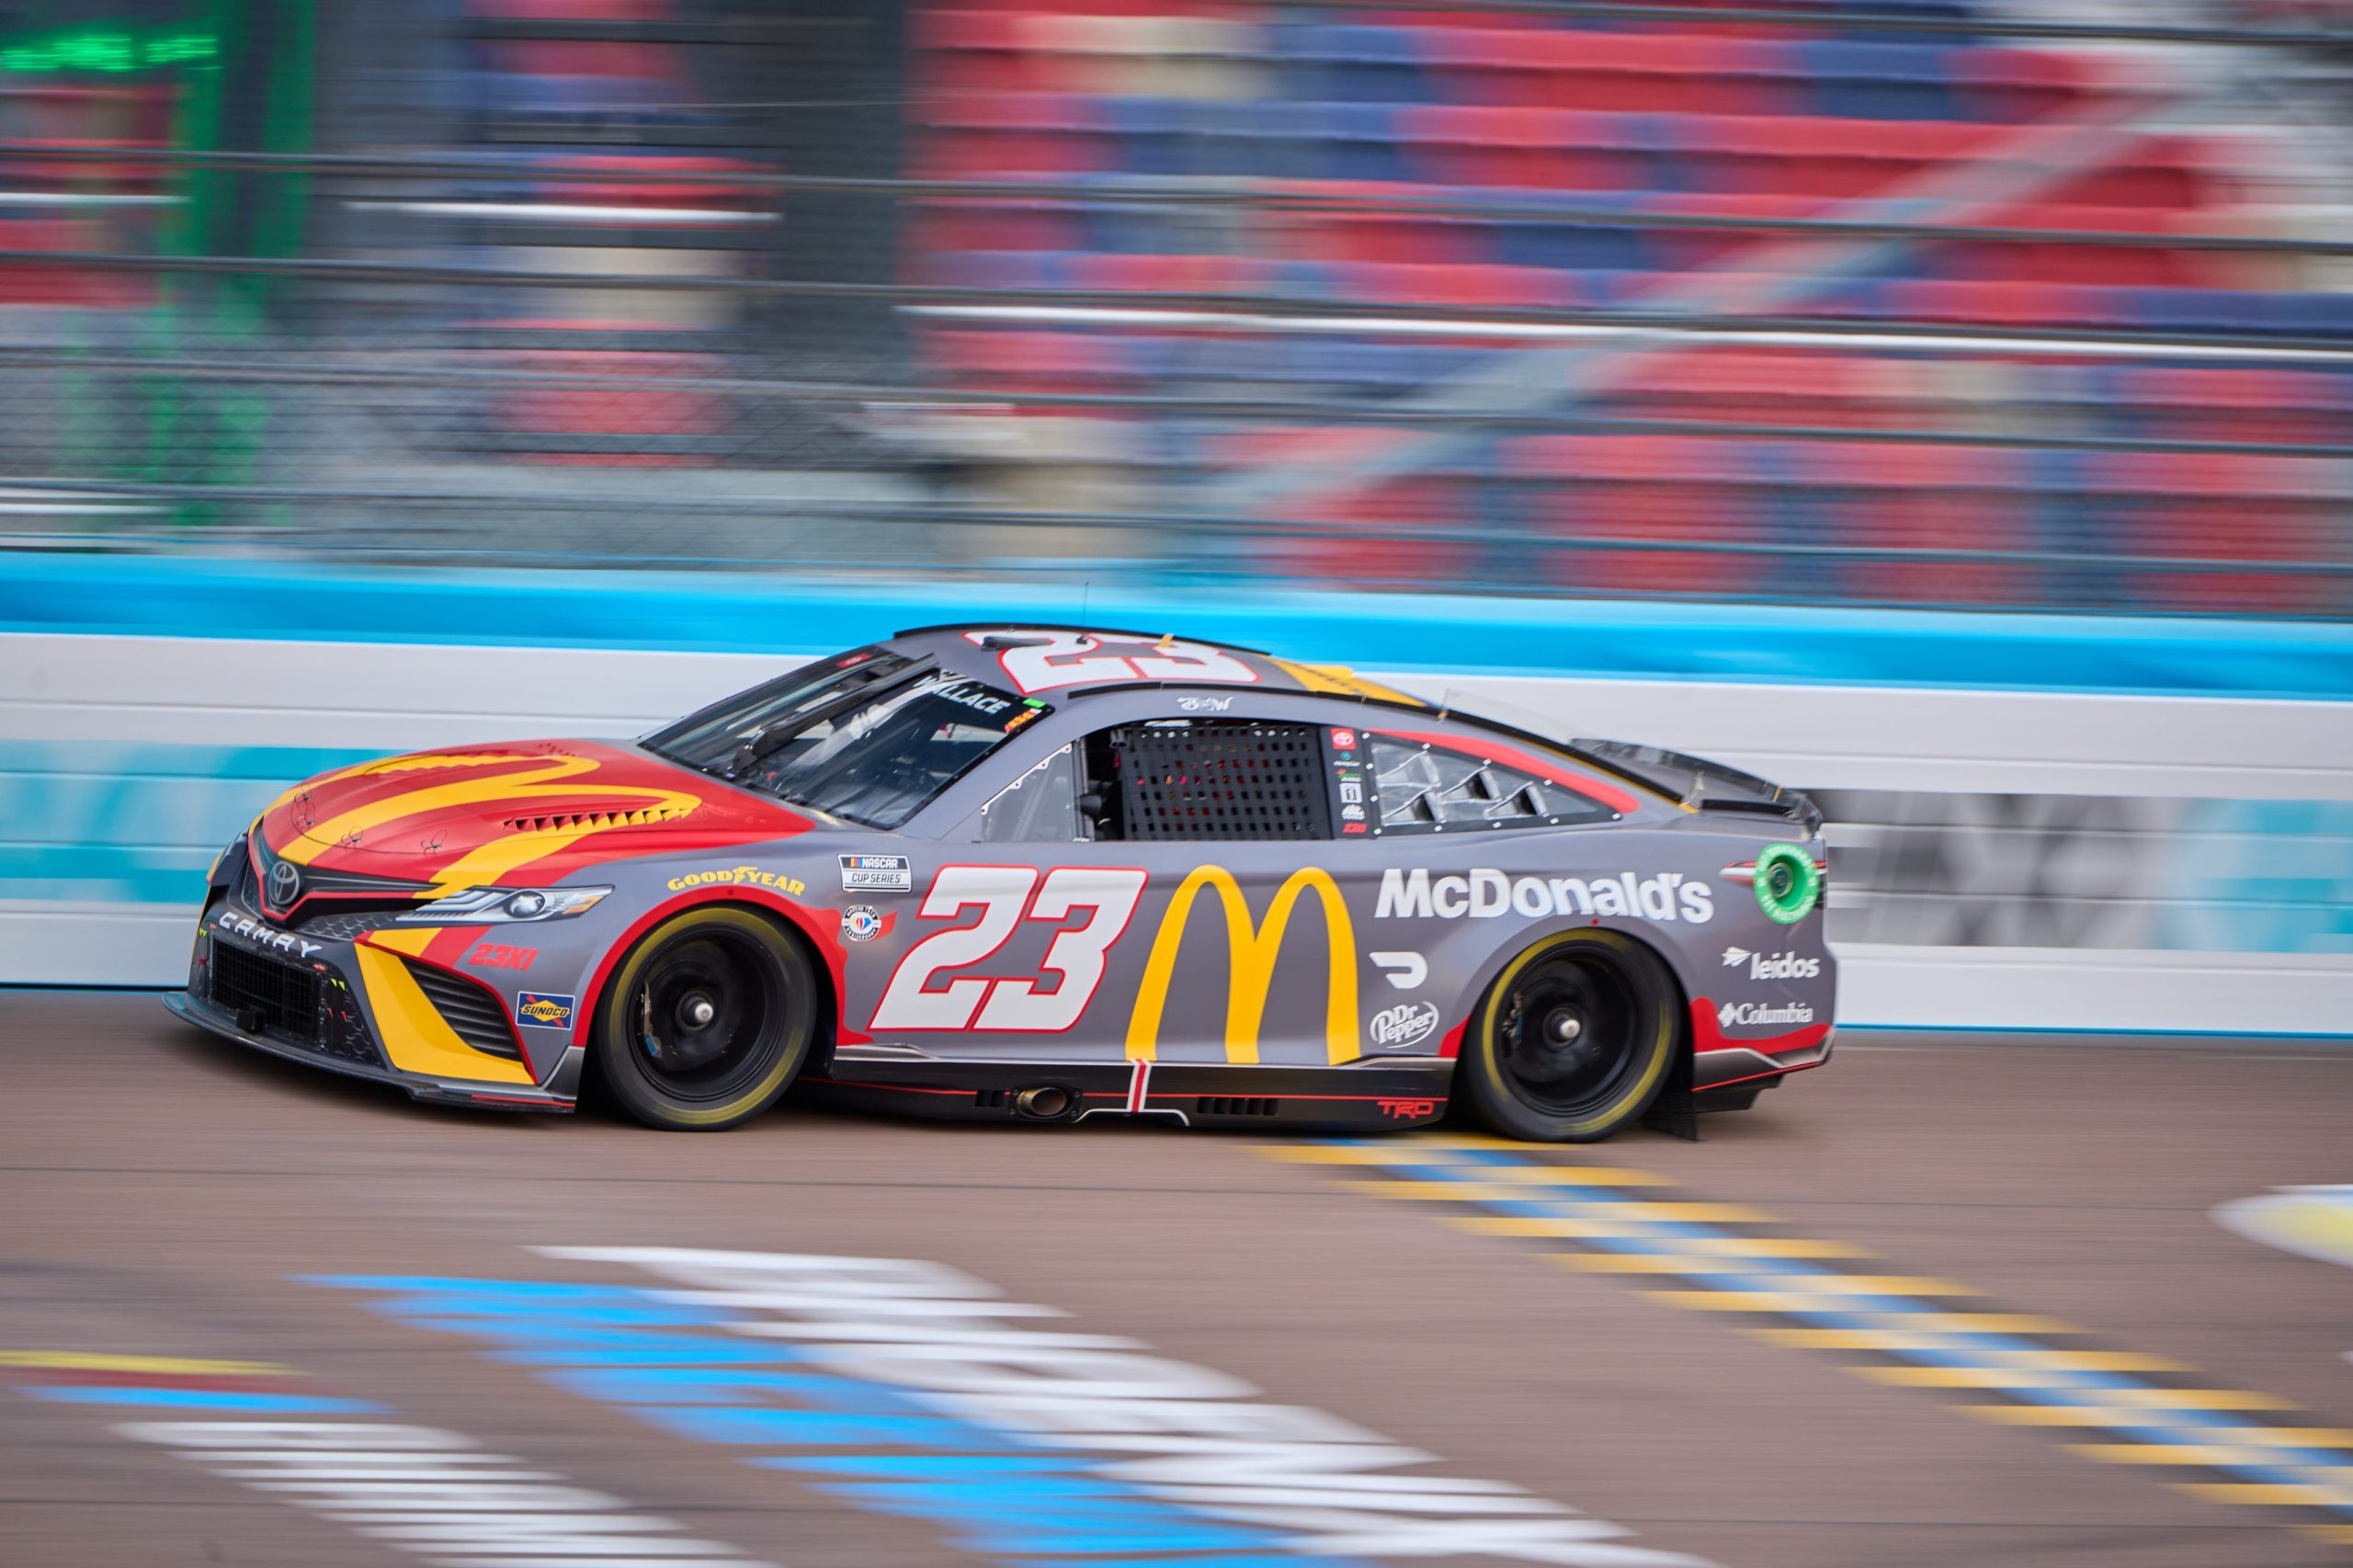 Mar 10, 2023; Avondale, AZ, USA; NASCAR Cup Series driver Bubba Wallace (23) crosses the start/finish line during the Cup Series practice session on Friday, March 10, 2023, at Phoenix Raceway. Mandatory Credit: Alex Gould/The Republic